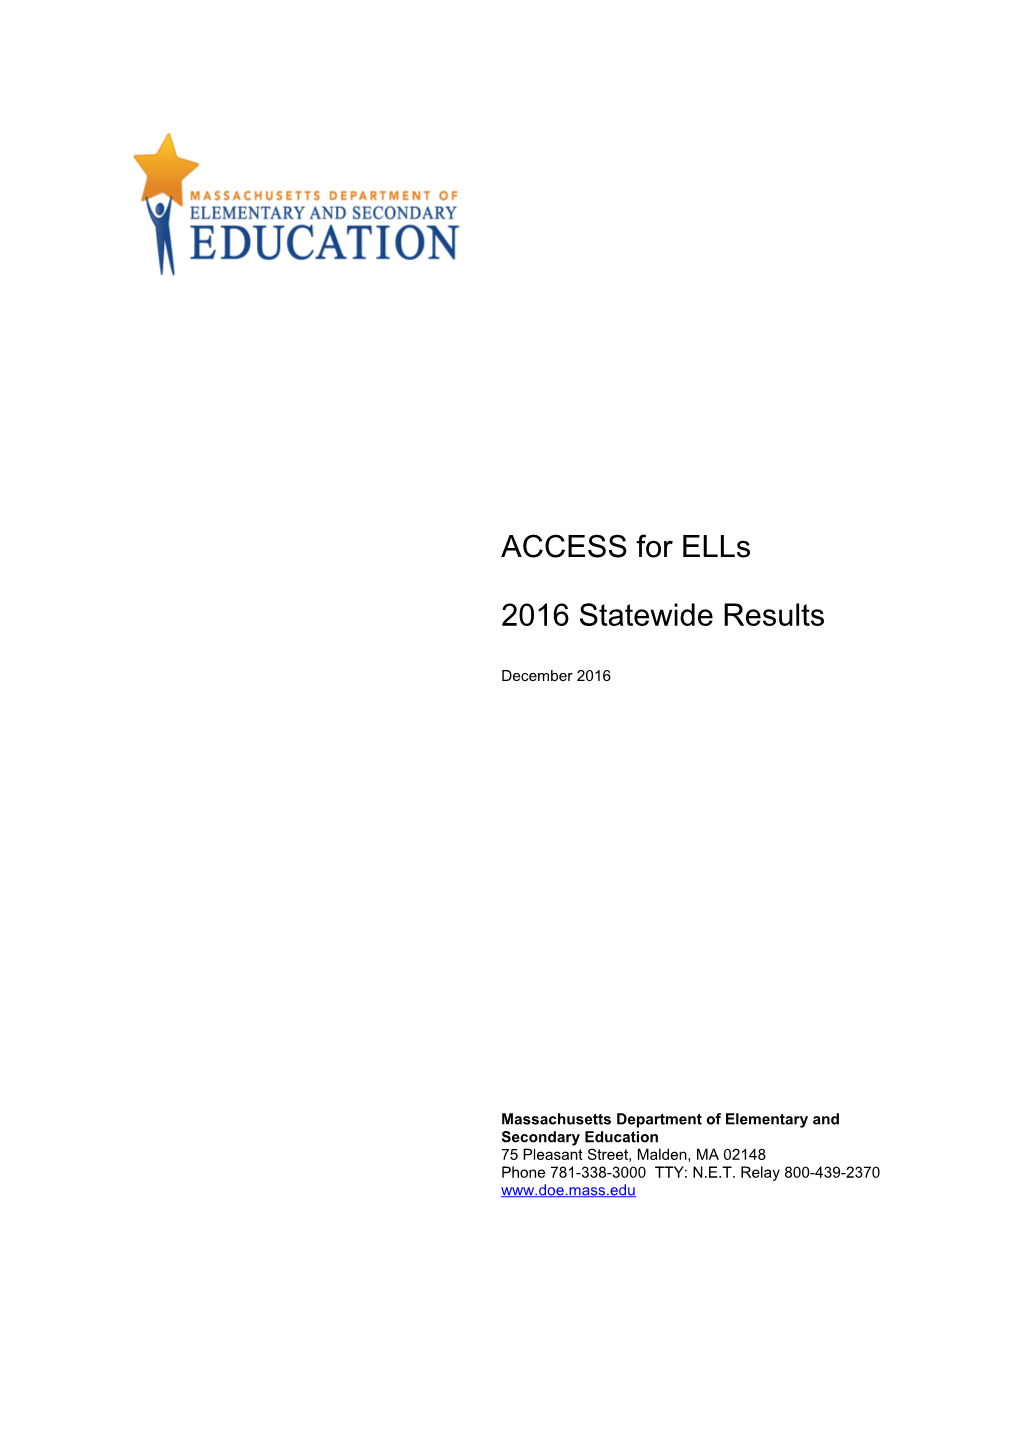 ACCESS for Ells 2016 Statewide Results